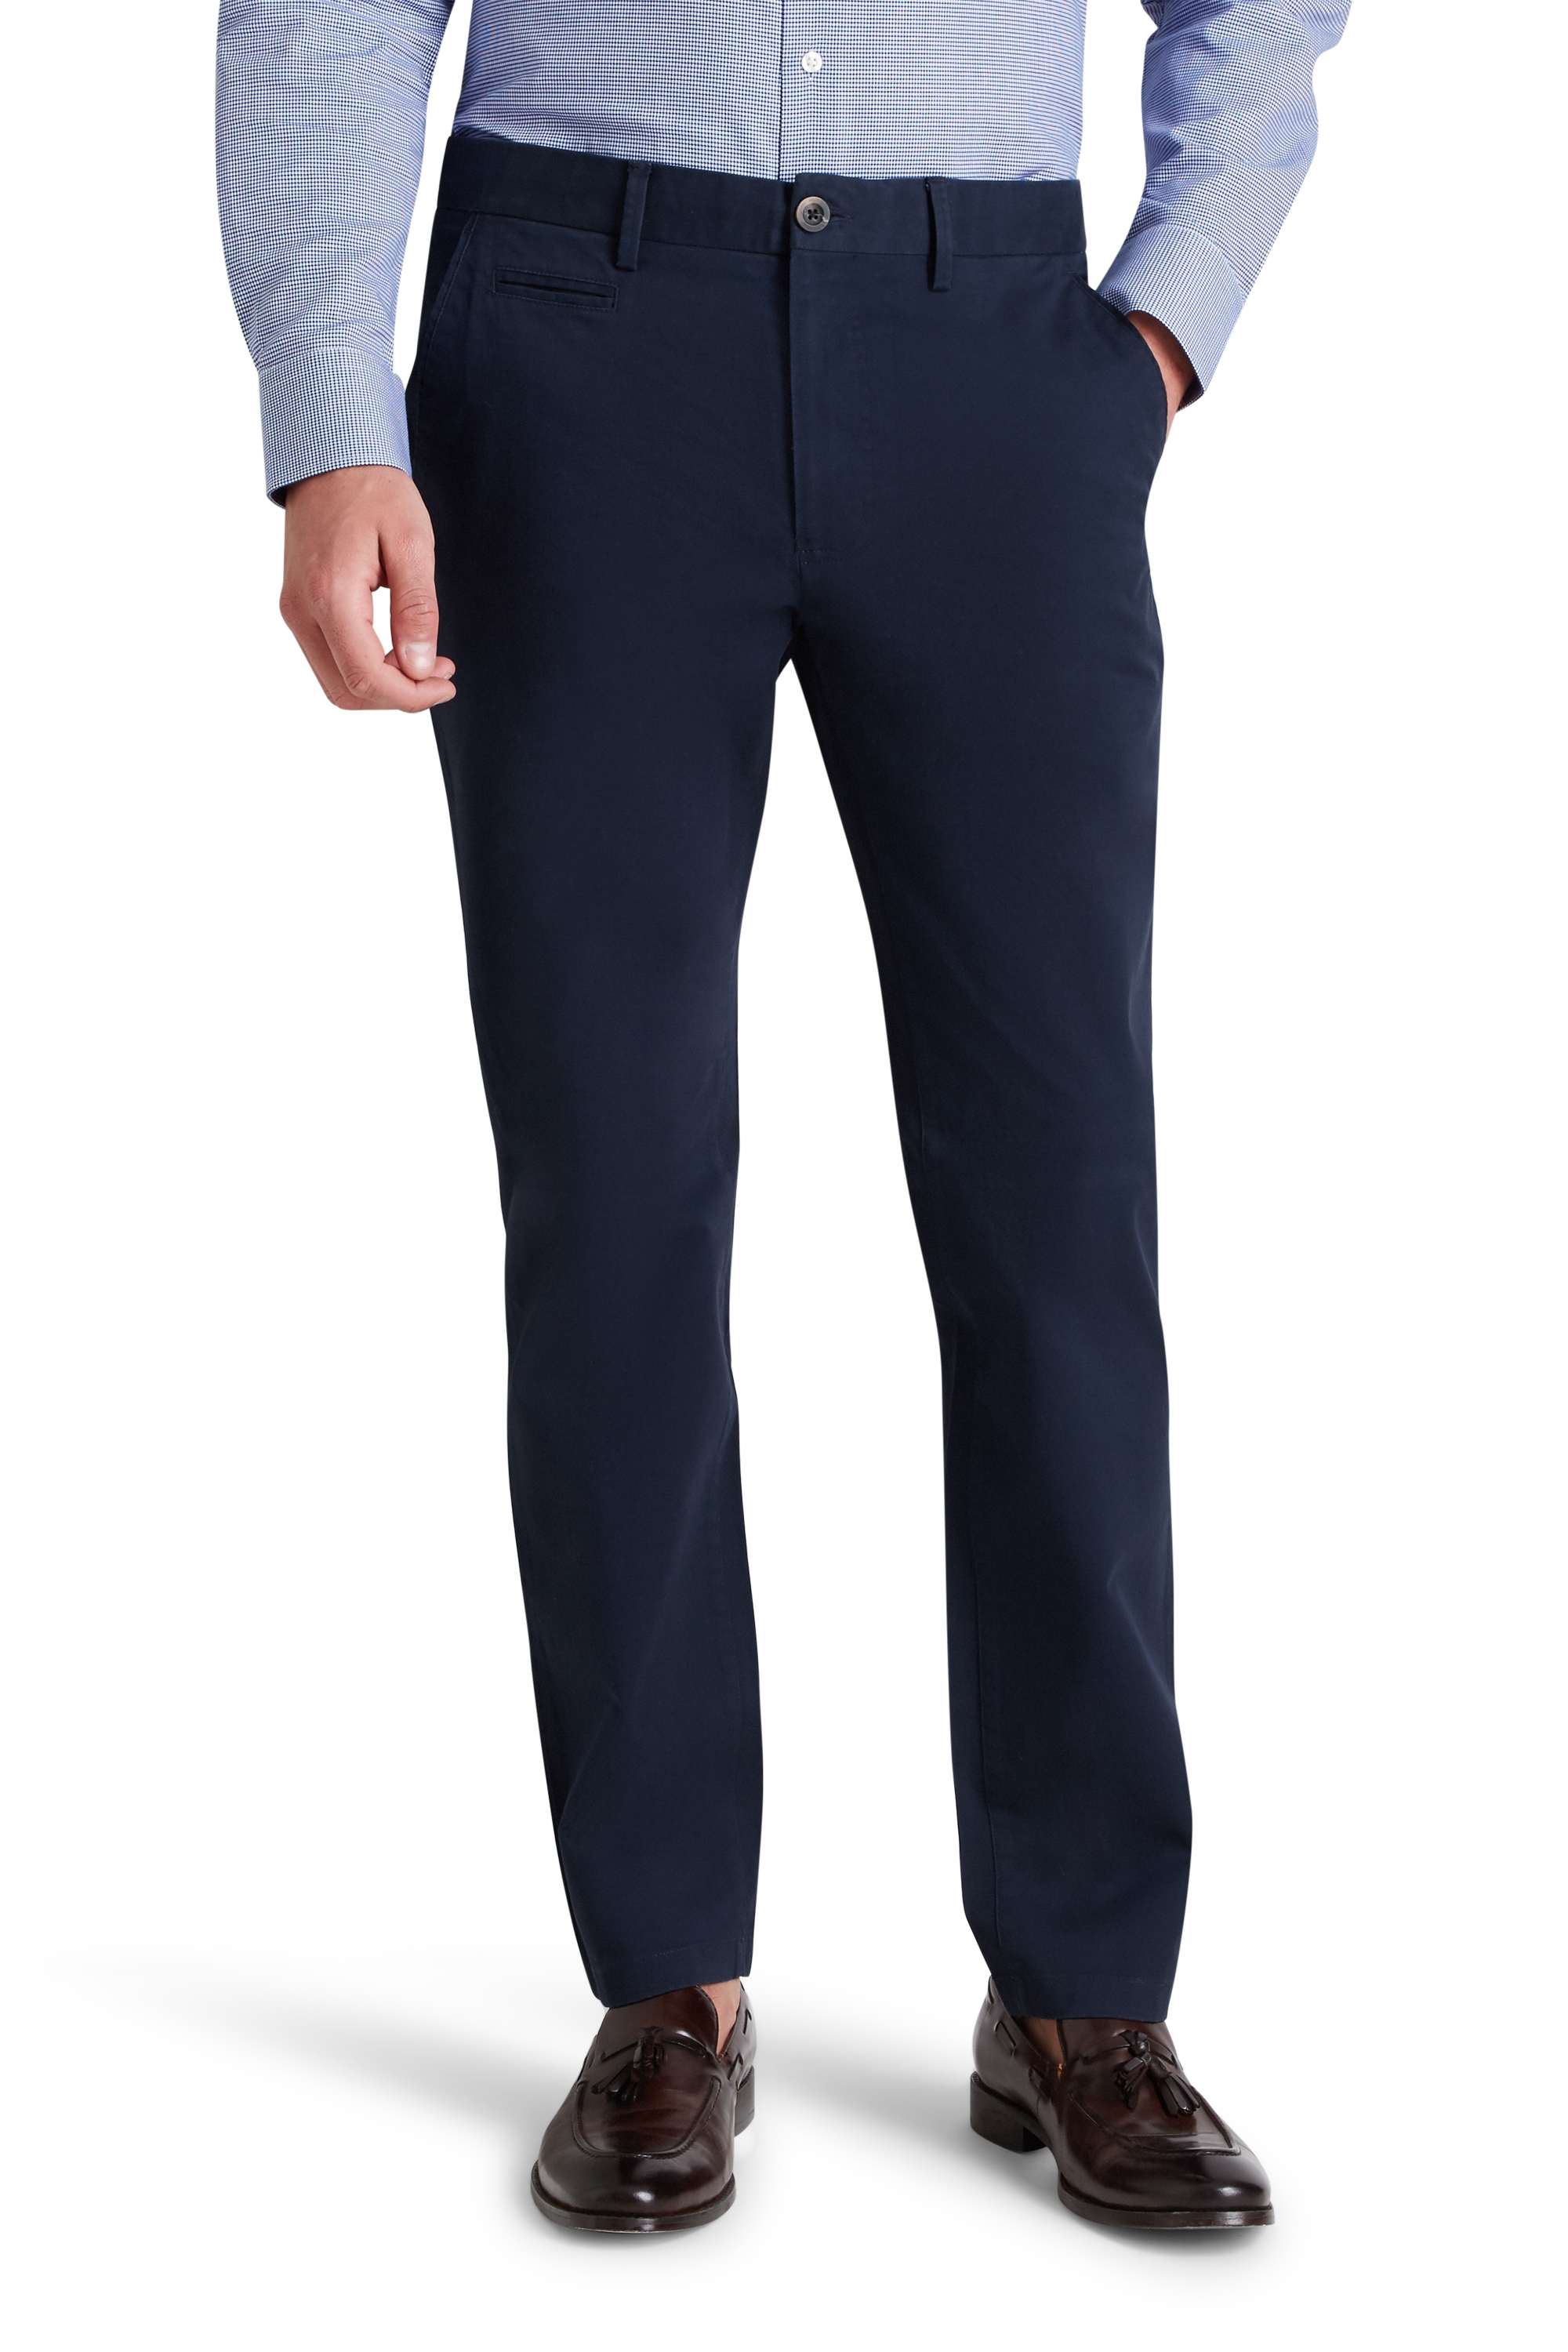 Tailored Fit Navy Stretch Chinos | Buy Online at Moss